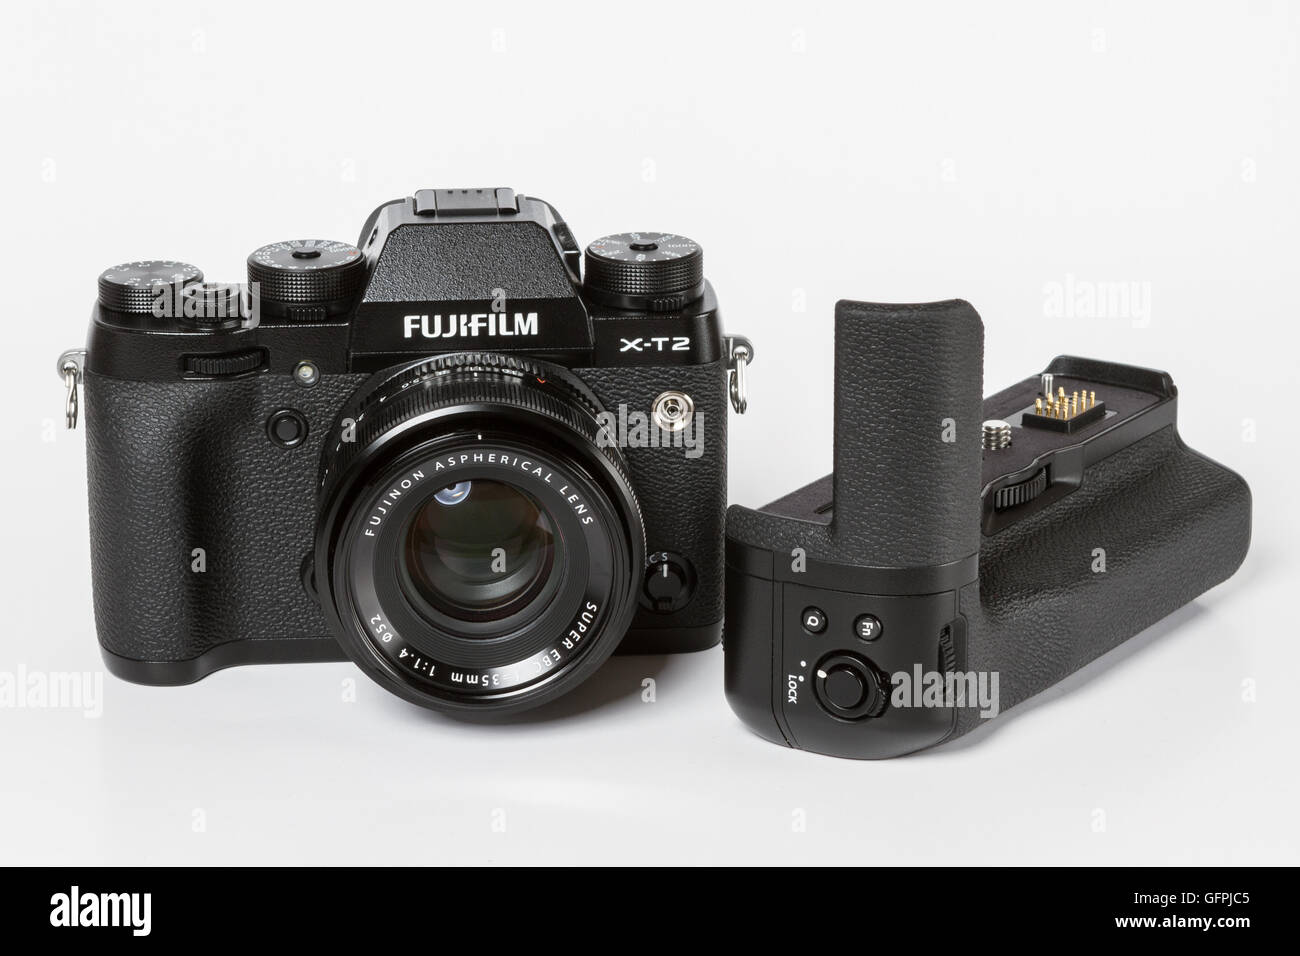 FUJIFILM X-T2, 24 megapixels, 4K video mirrorless camera With 35mm 1.4 FUJINON  LENS and with an additional battery grip Stock Photo